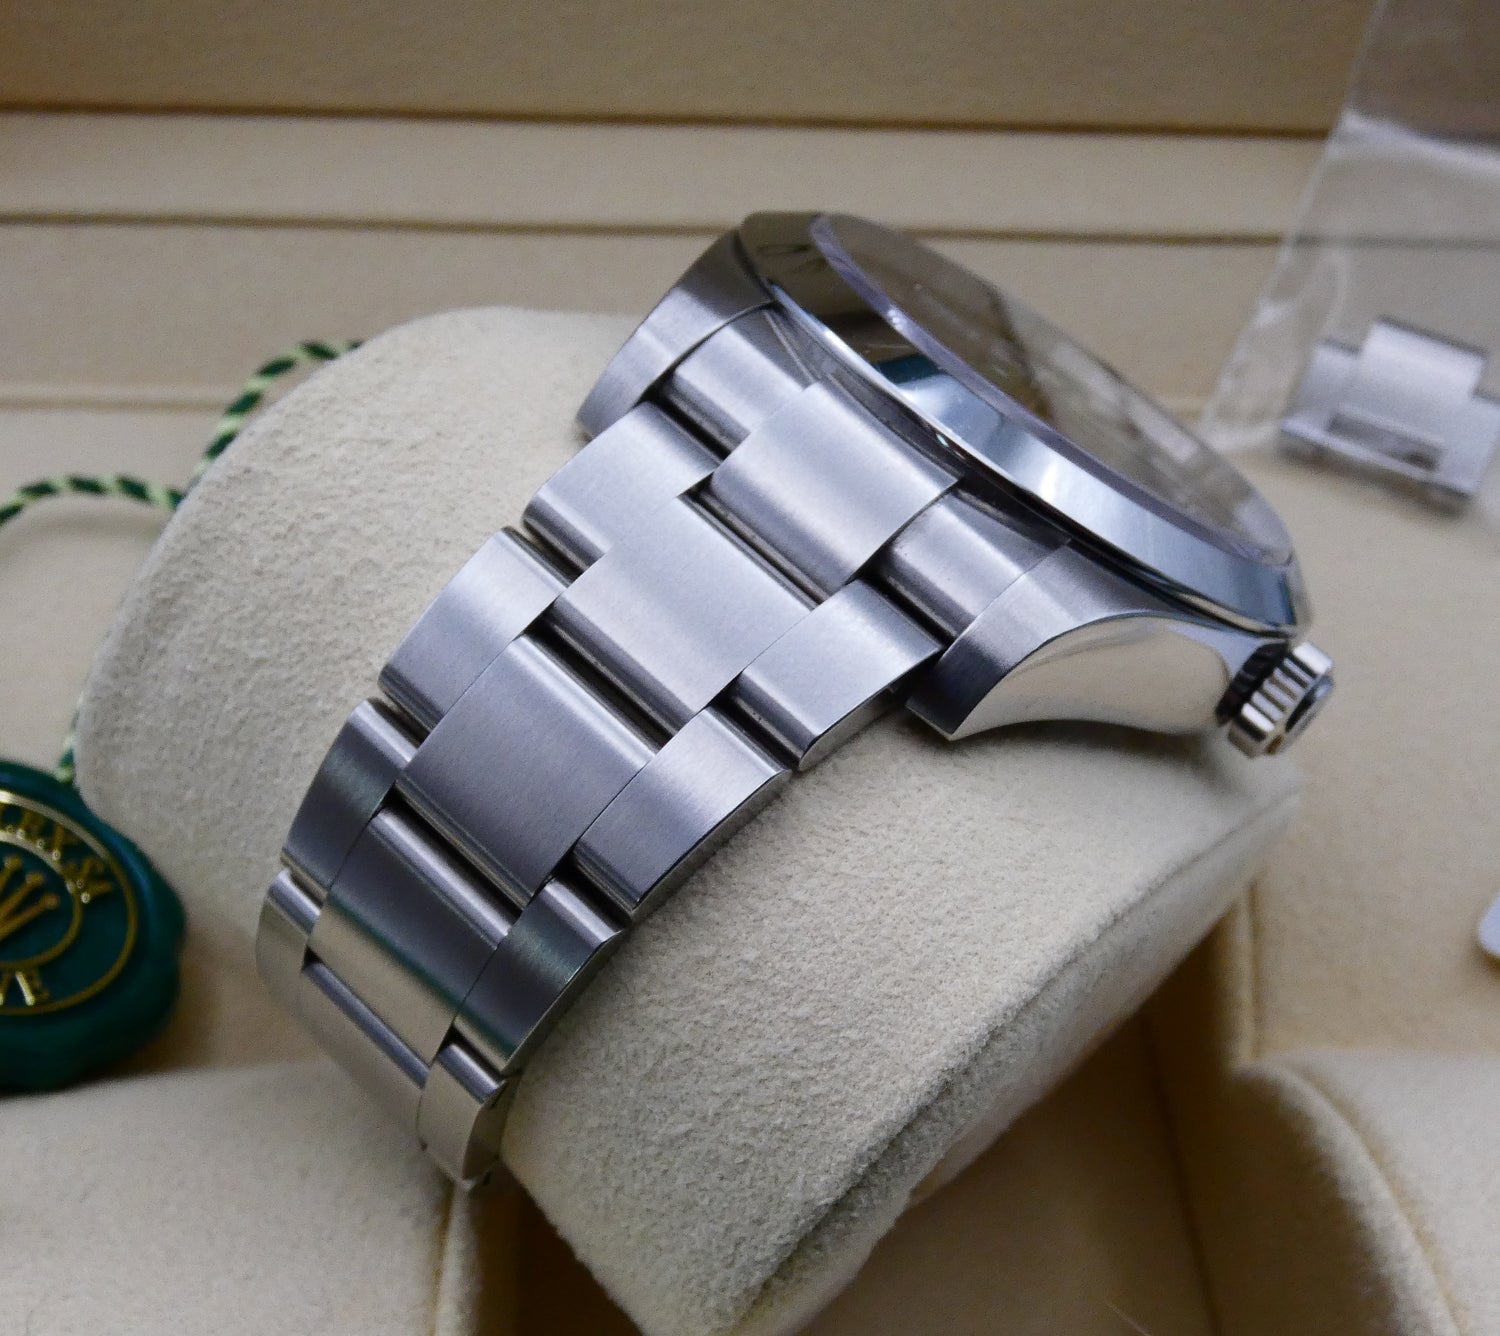 SOLD Rolex Air King 116900